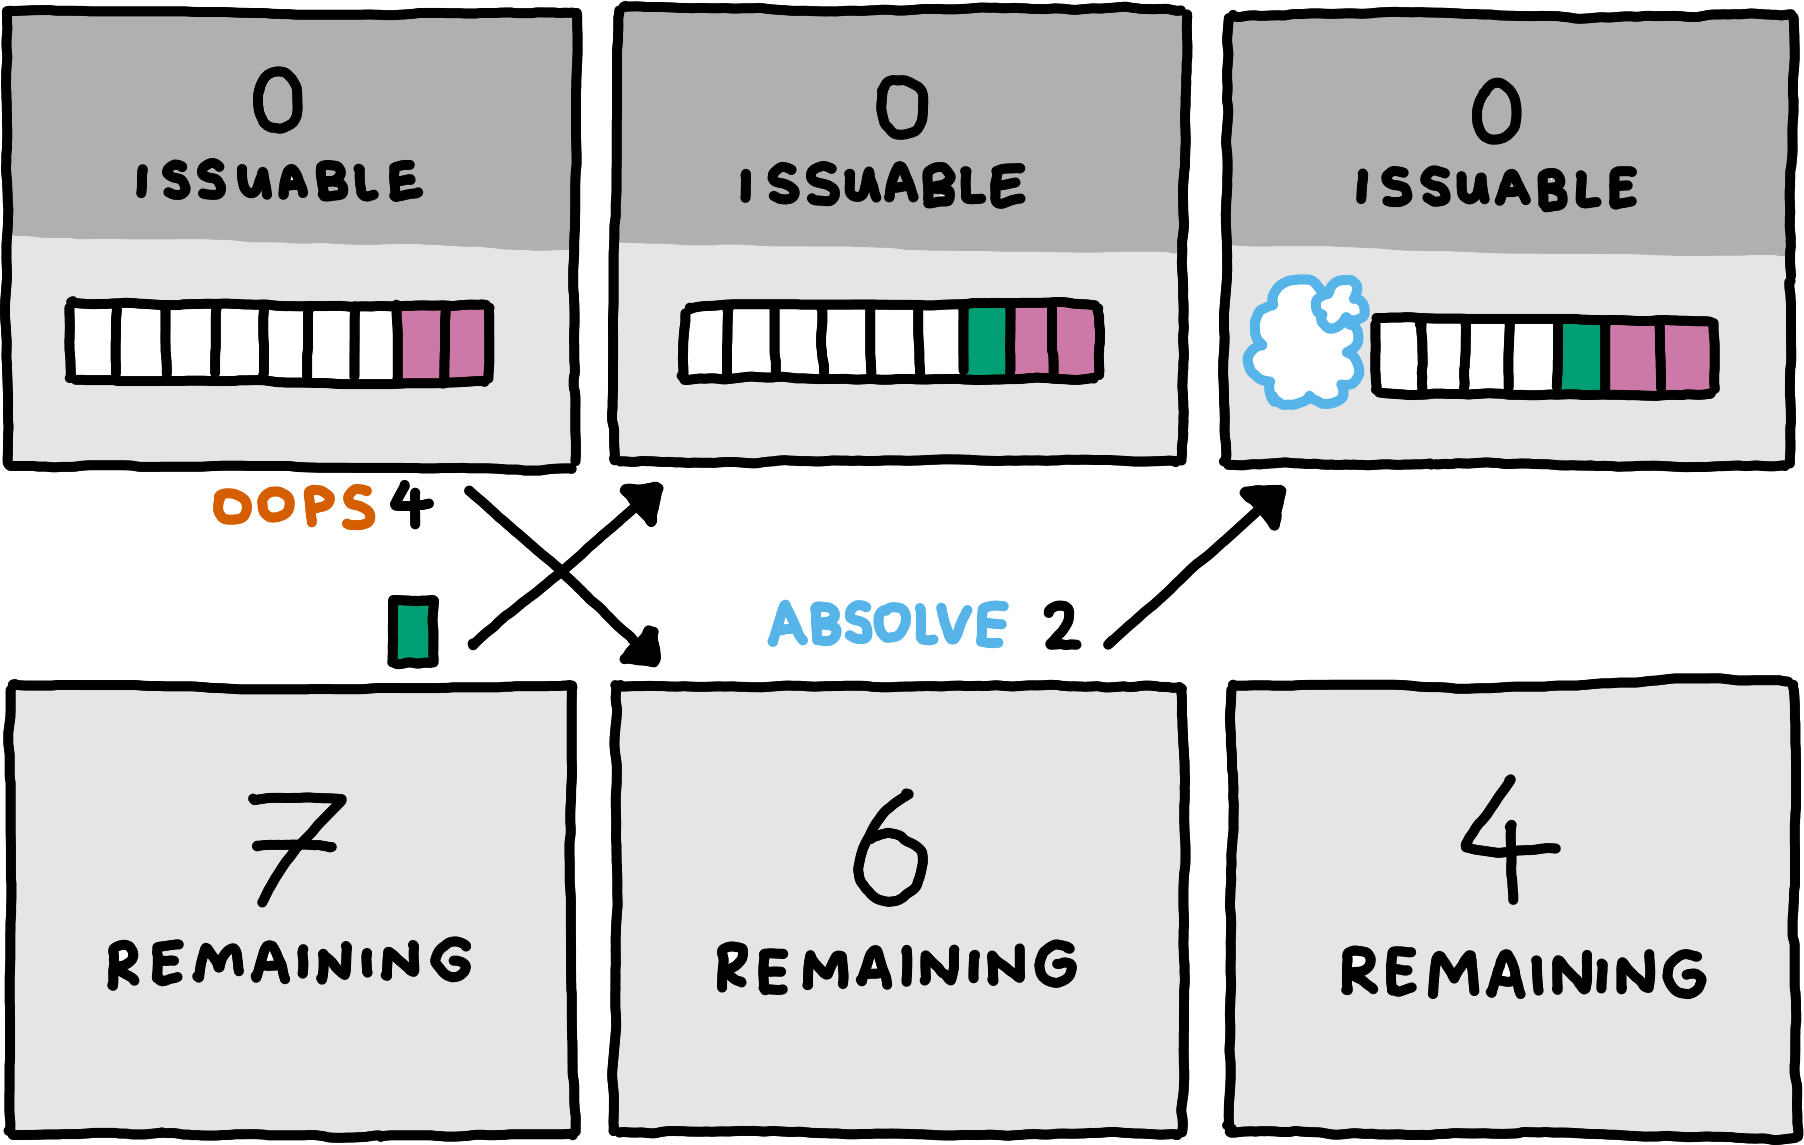 A server-client diagram. The server starts with nine buffer slots, two of which are occupied by a message. Its issuable guarantees are zero, the client starts with seven remaining guarantees. In the first step, the server asks for absolution down to four remaining guarantees, and concurrently, the clients sends a message of size one. Hence, the client’s remaining guarantees are six when the server’s request for absolution arrives. The server receives the one-byte message and buffers it. The client then absolves two guarantees, reducing its remaining guarantees to four. The server receives the absolution and can shrink its buffer by two slots, leaving it with a total buffer capacity of seven (three slots occupied by the two buffered messages, and four unused slots).